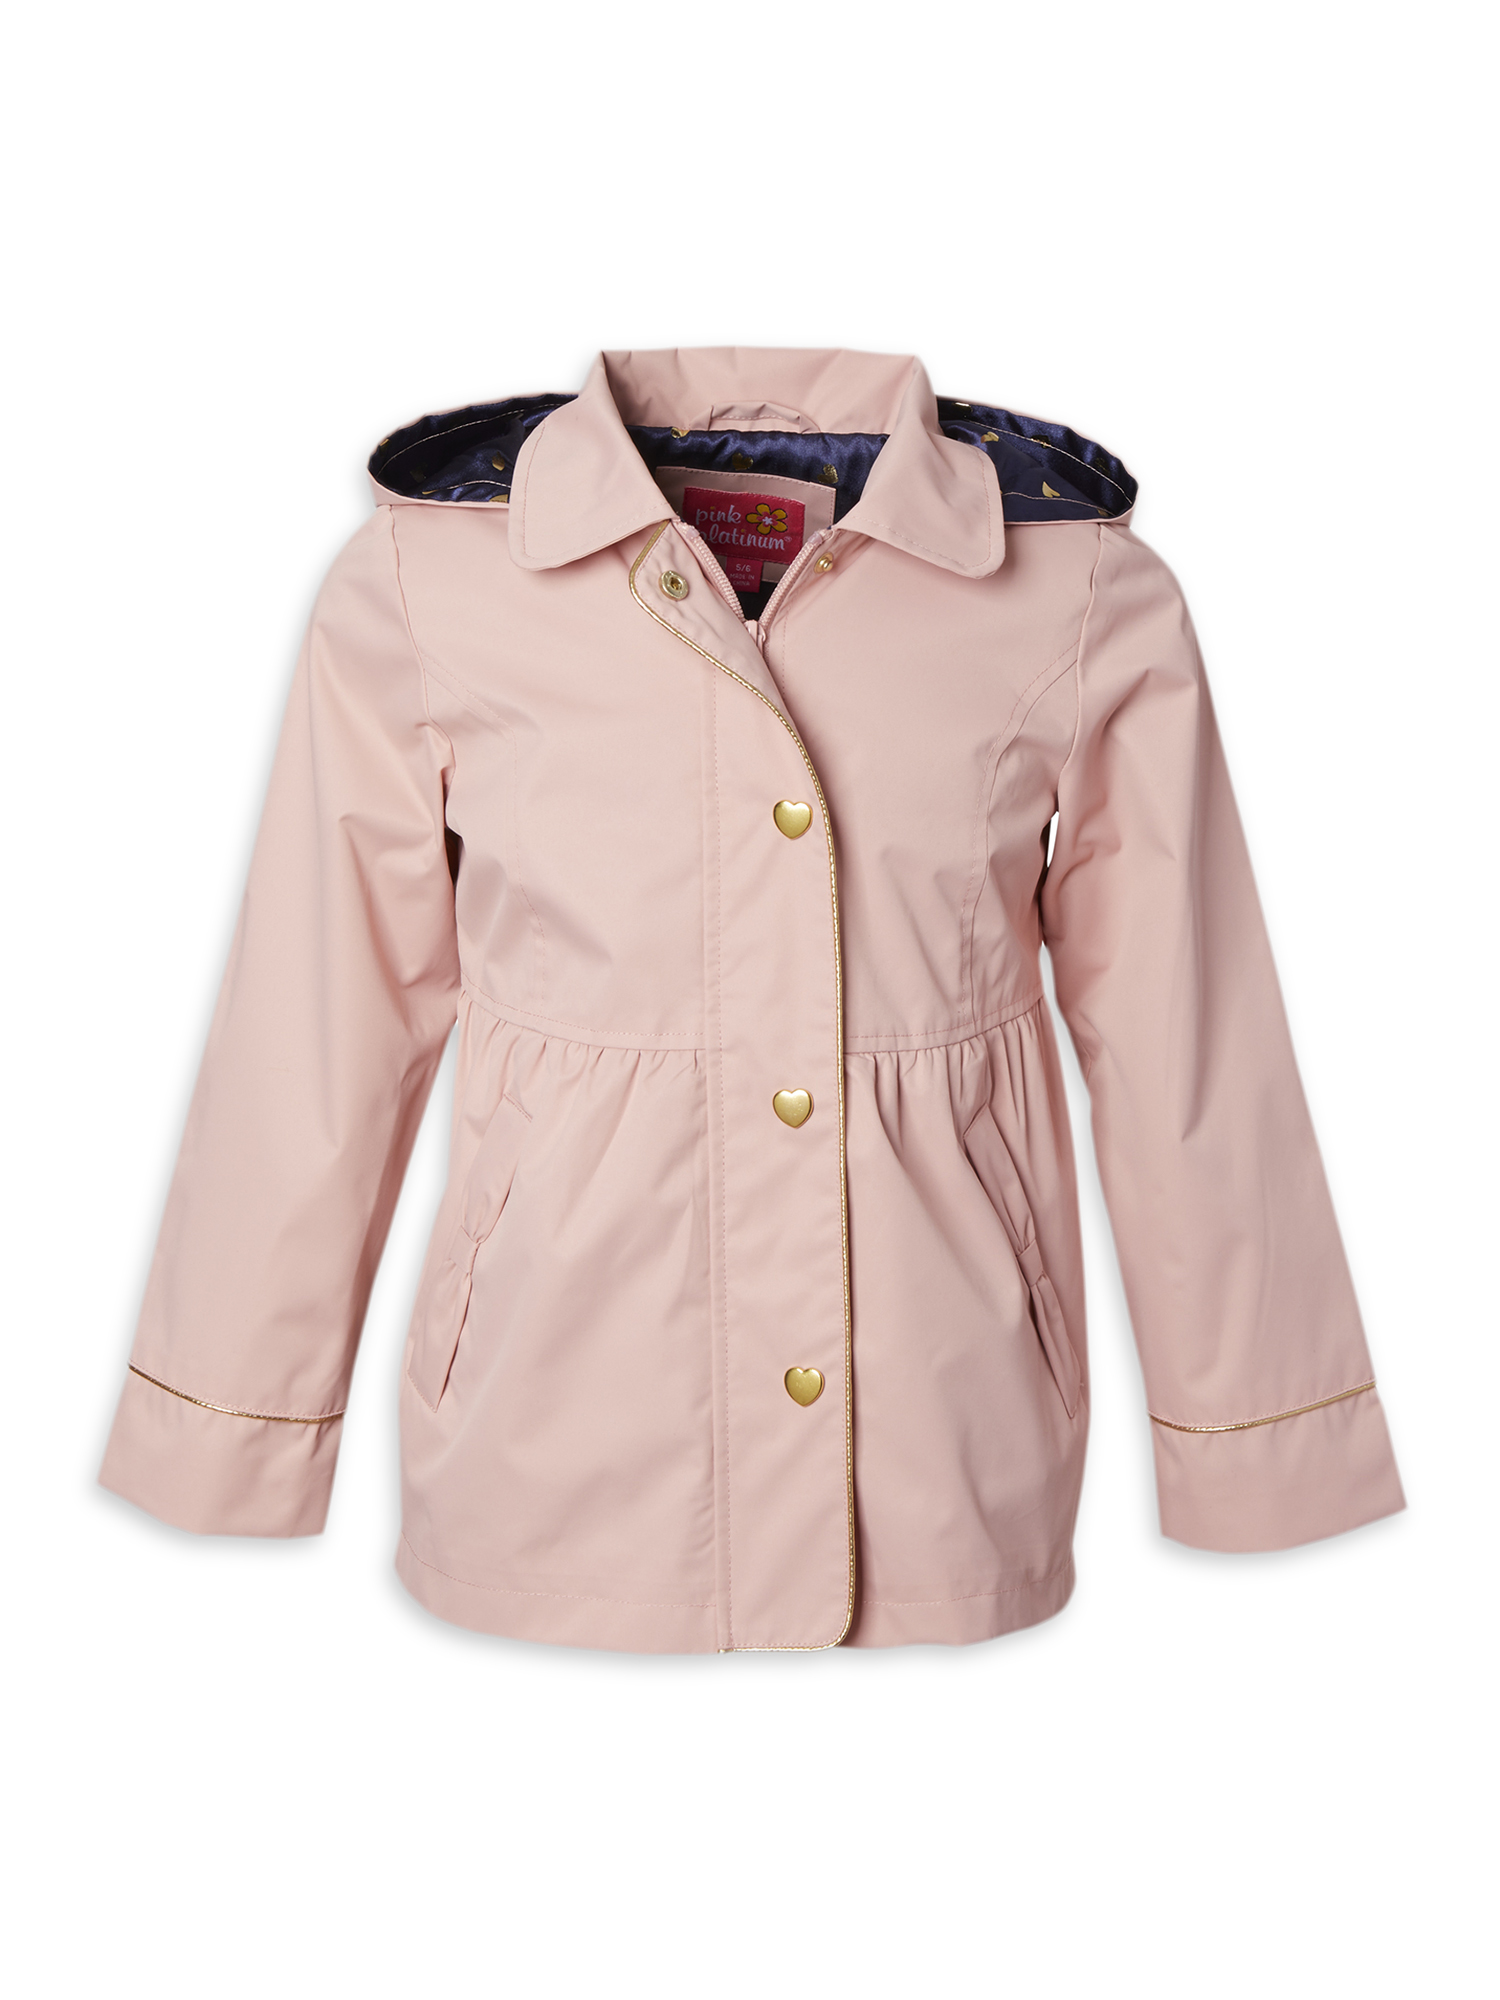 Pink Platinum Baby and Toddler Girls' Lightweight Water Repellent Anorak Jacket - image 1 of 1